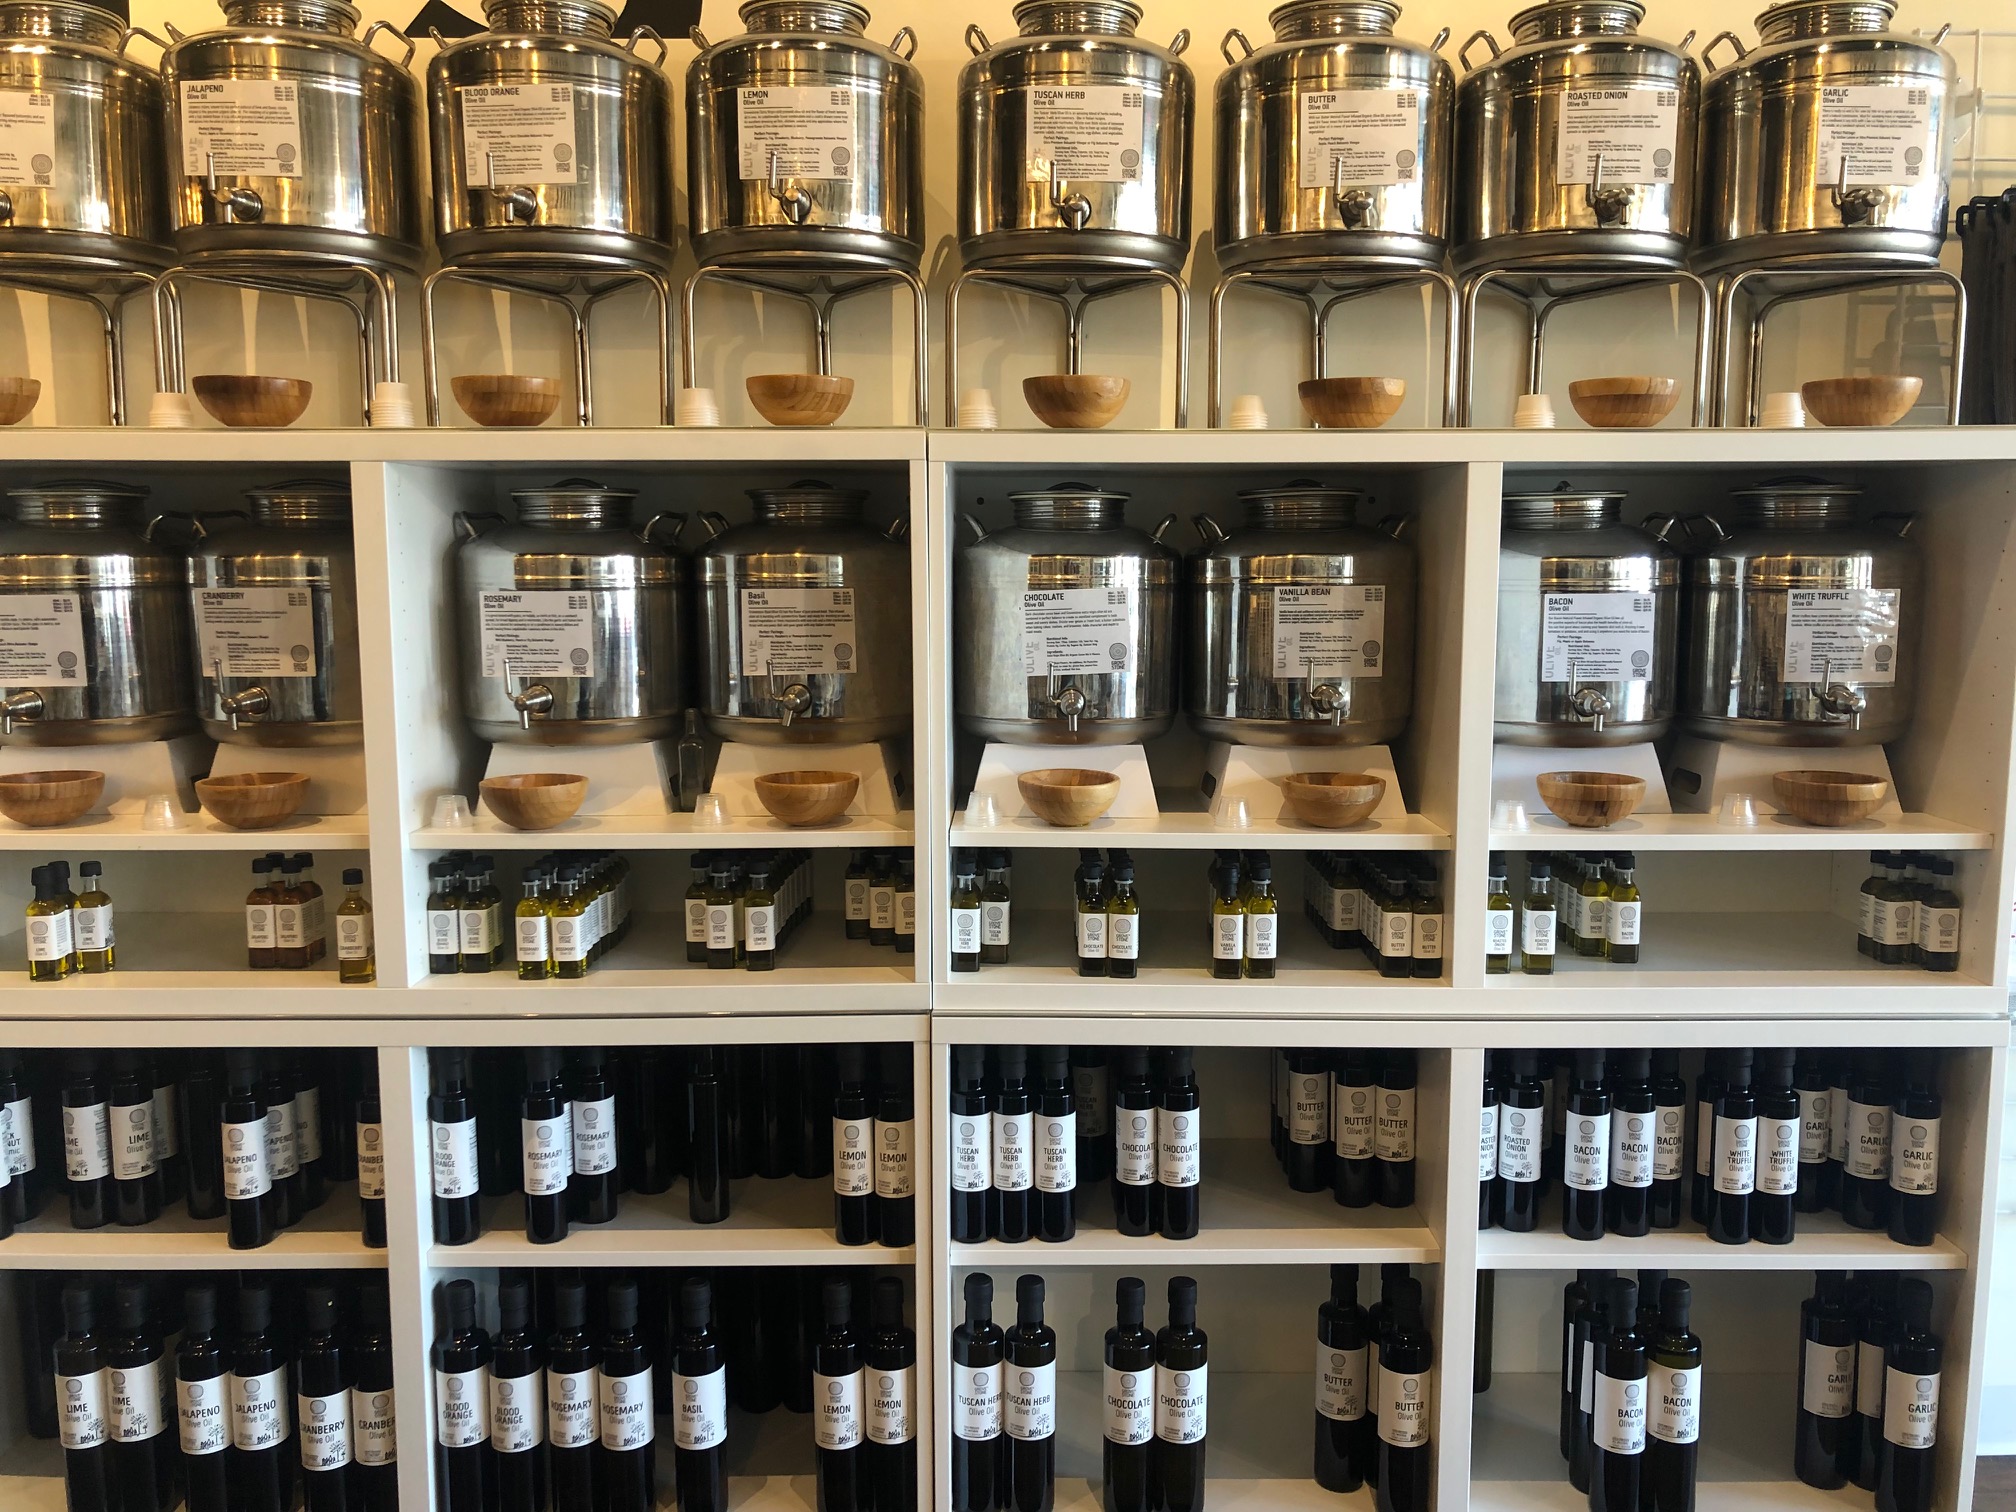 The white shelves are topped with silver beverage dispensers filled with infused olive oils. Below, the shelves have three sizes of bottles (small, medium, and large) on the shelf for sale. Photo by Alyssa Buckley.